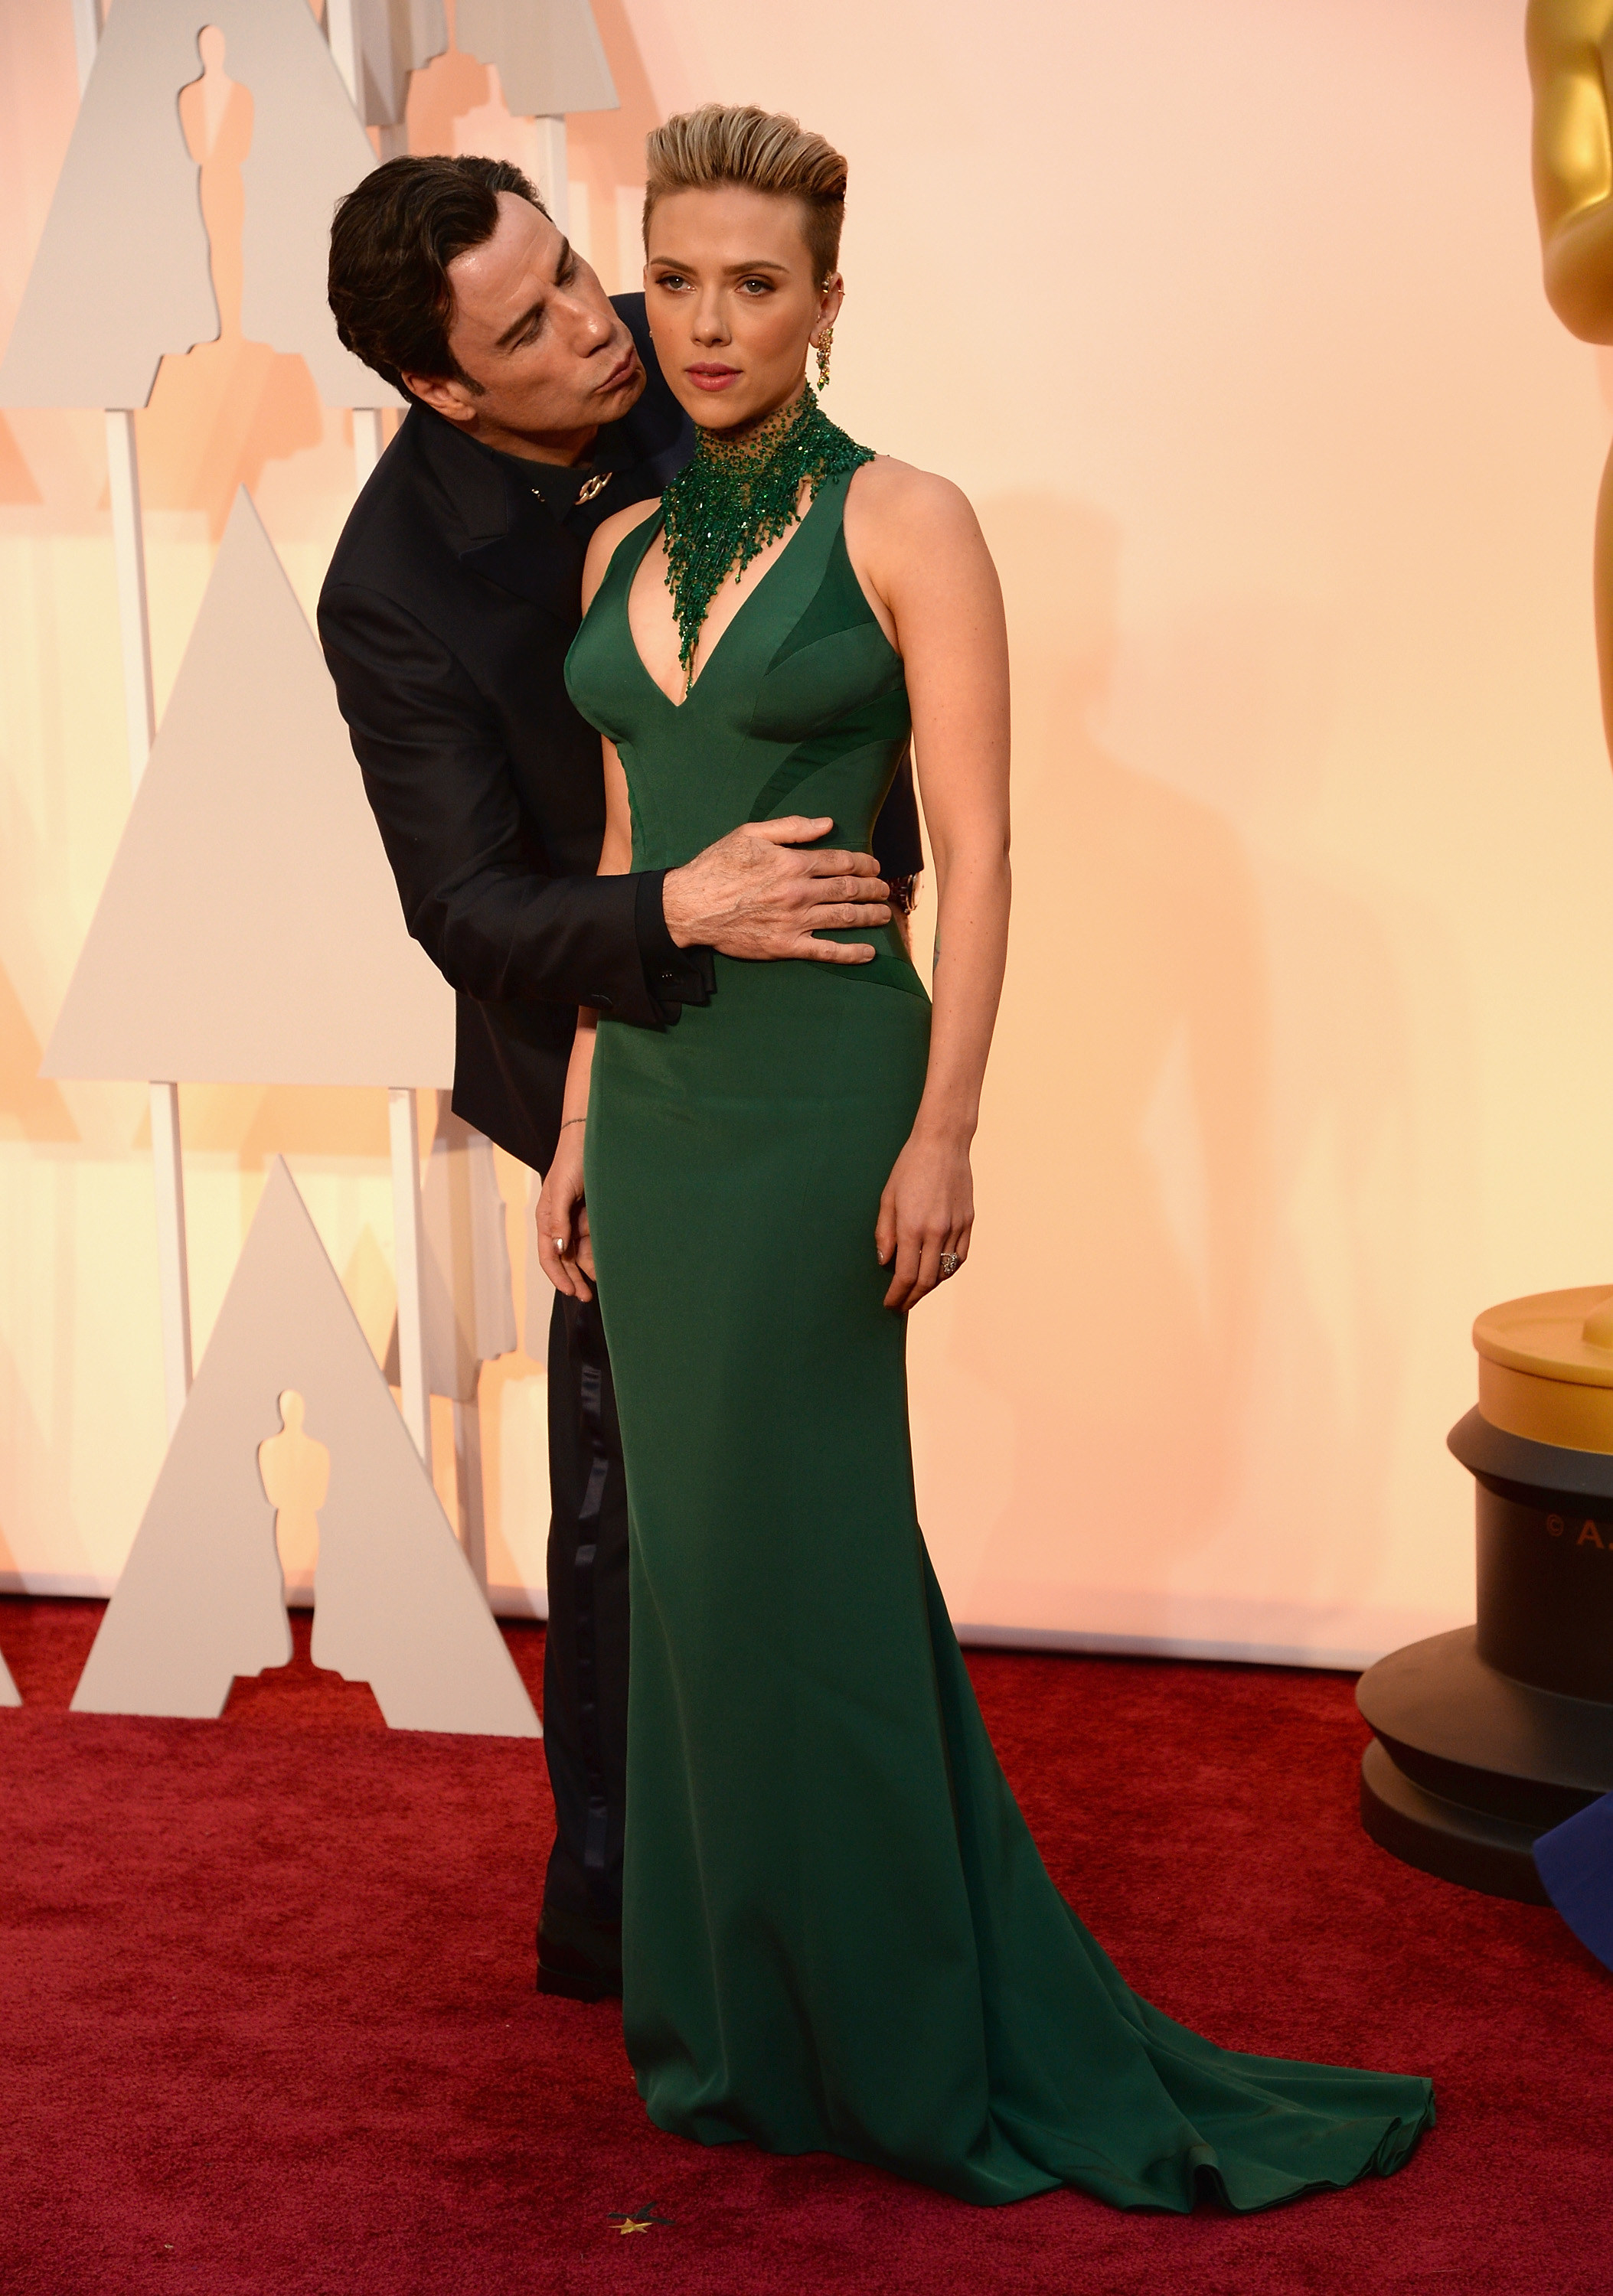 Scarlett Johansson stands on the Oscars red carpet in a green gown, John Travolta stands behind her with his hand on her stomach, he&#x27;s leaning in to kiss her cheek